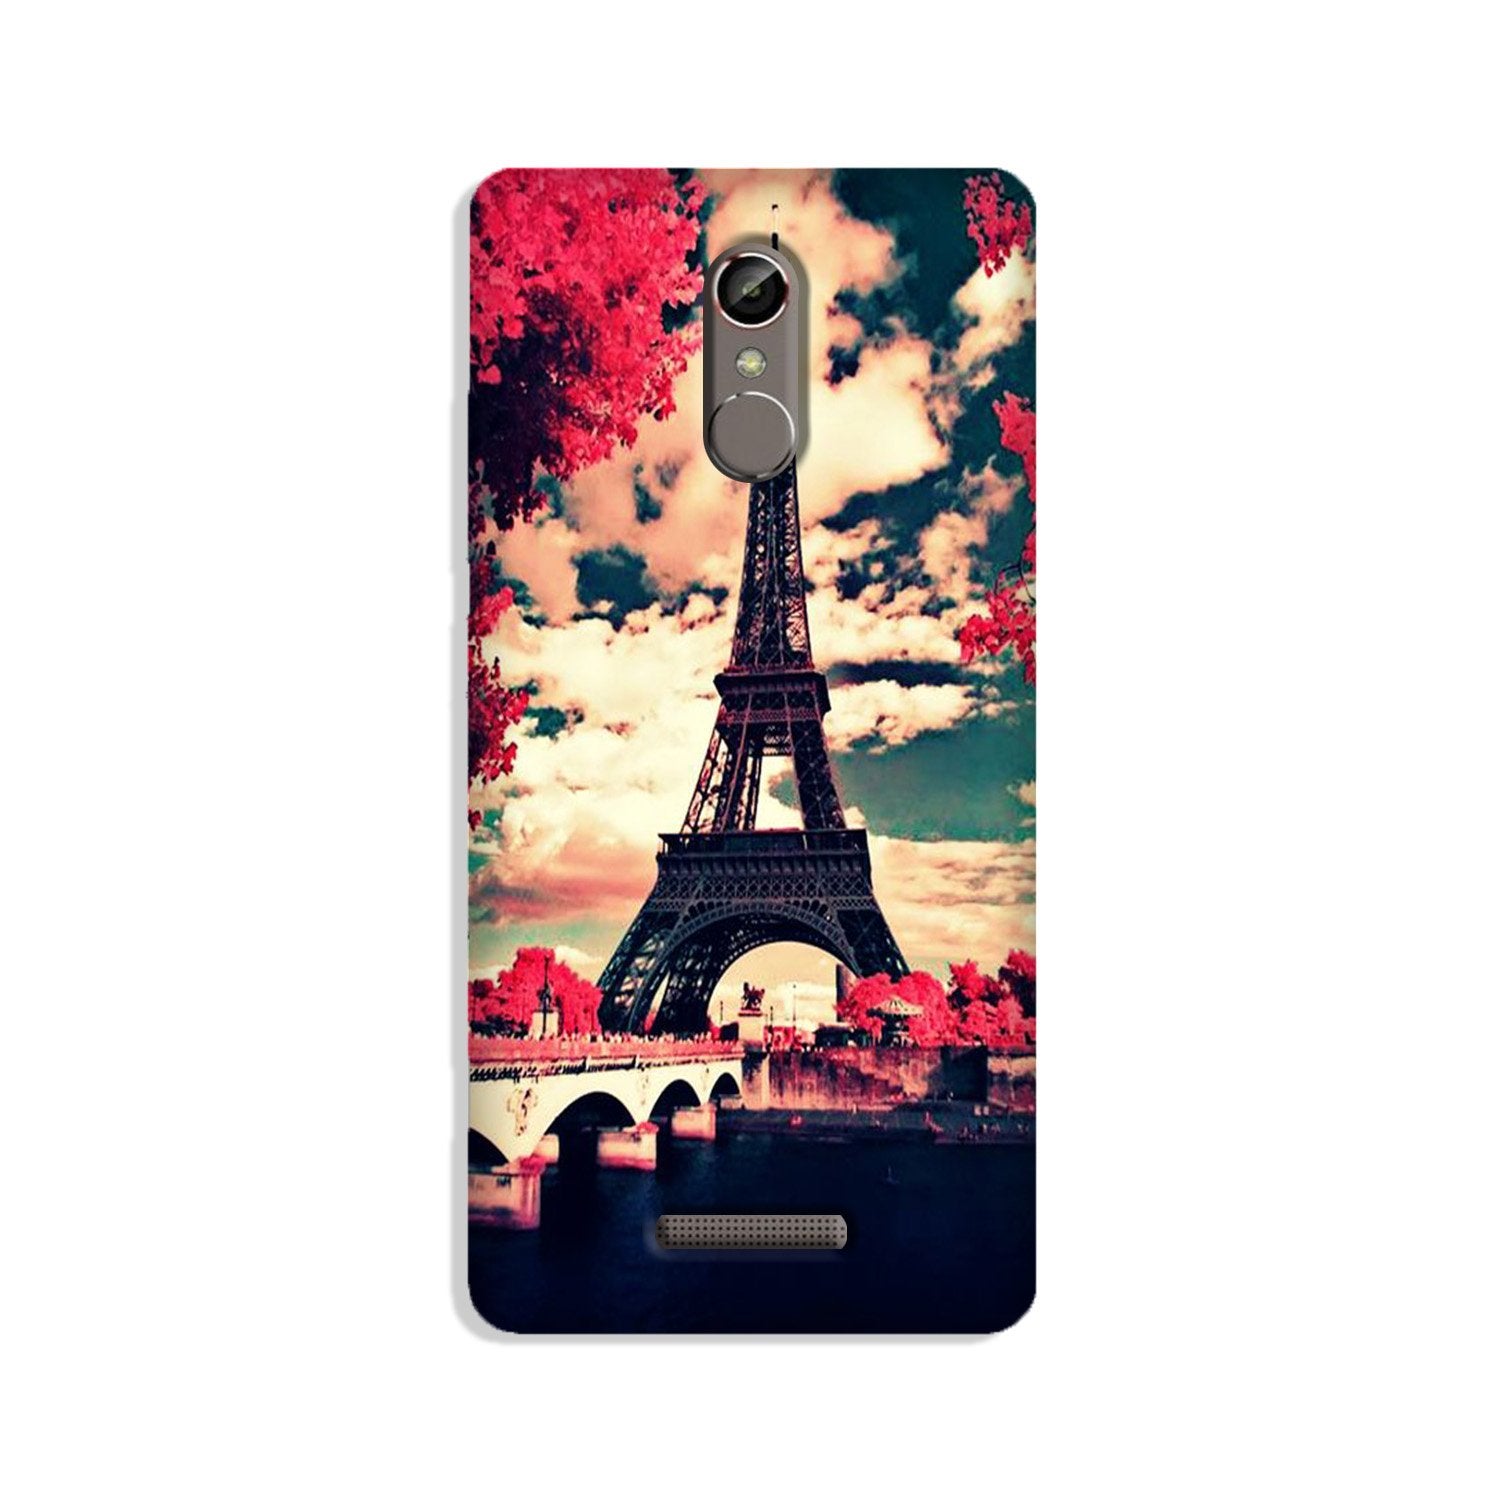 Eiffel Tower Case for Gionee S6s (Design No. 212)